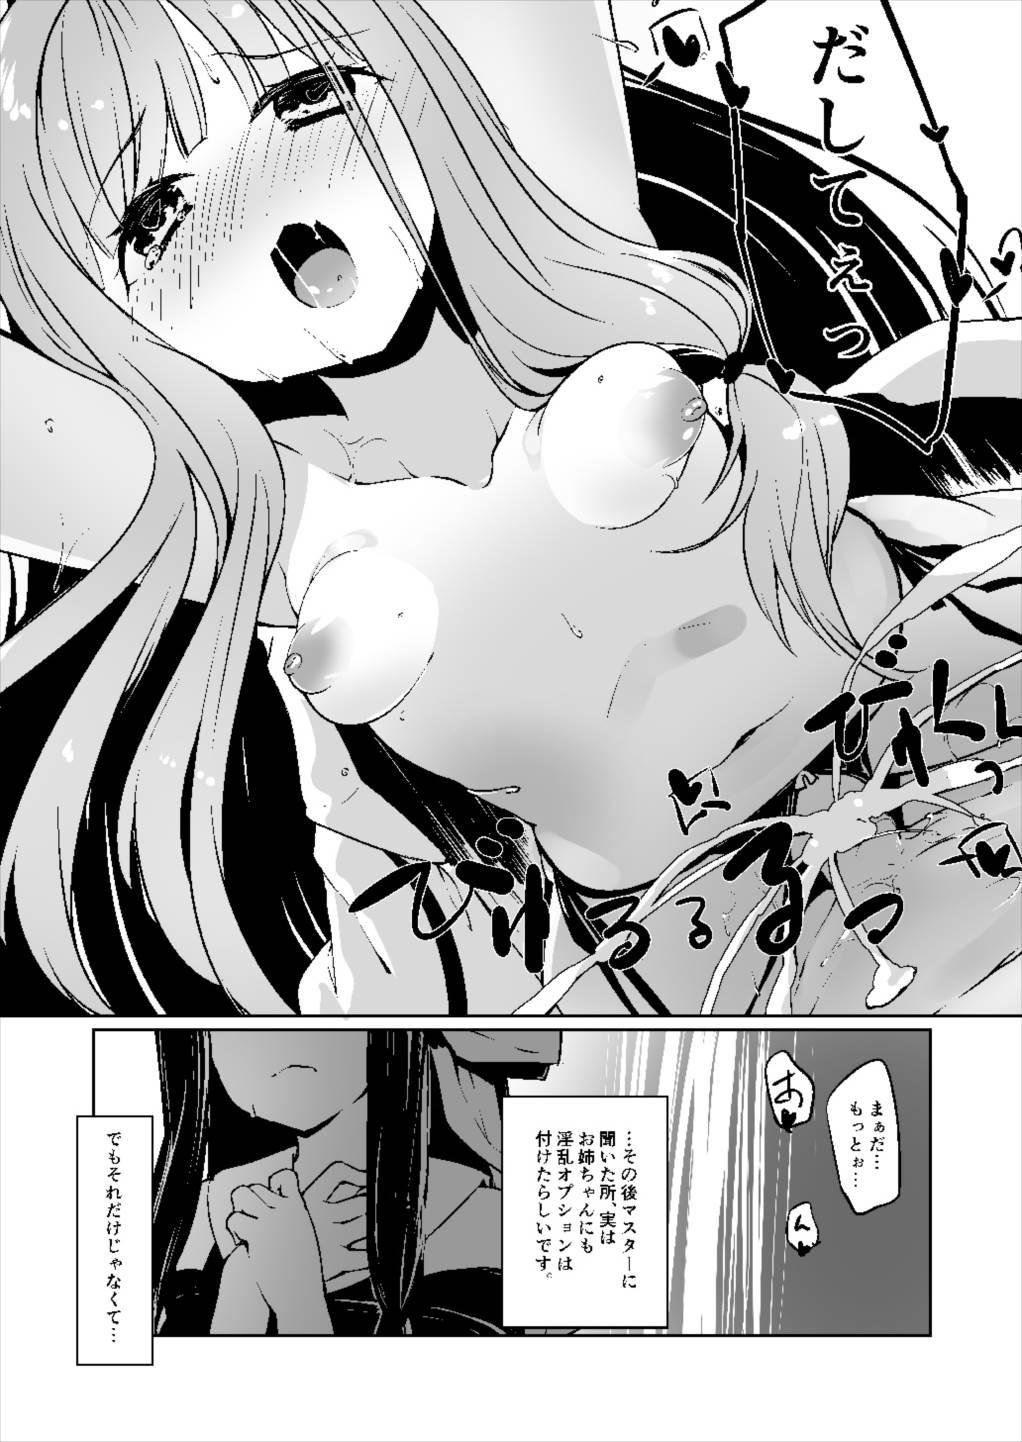 Stepbrother コトノハラバーズ VOL.06 【お姉ちゃん観察日記】 - Vocaloid Voiceroid Bukkake Boys - Page 7